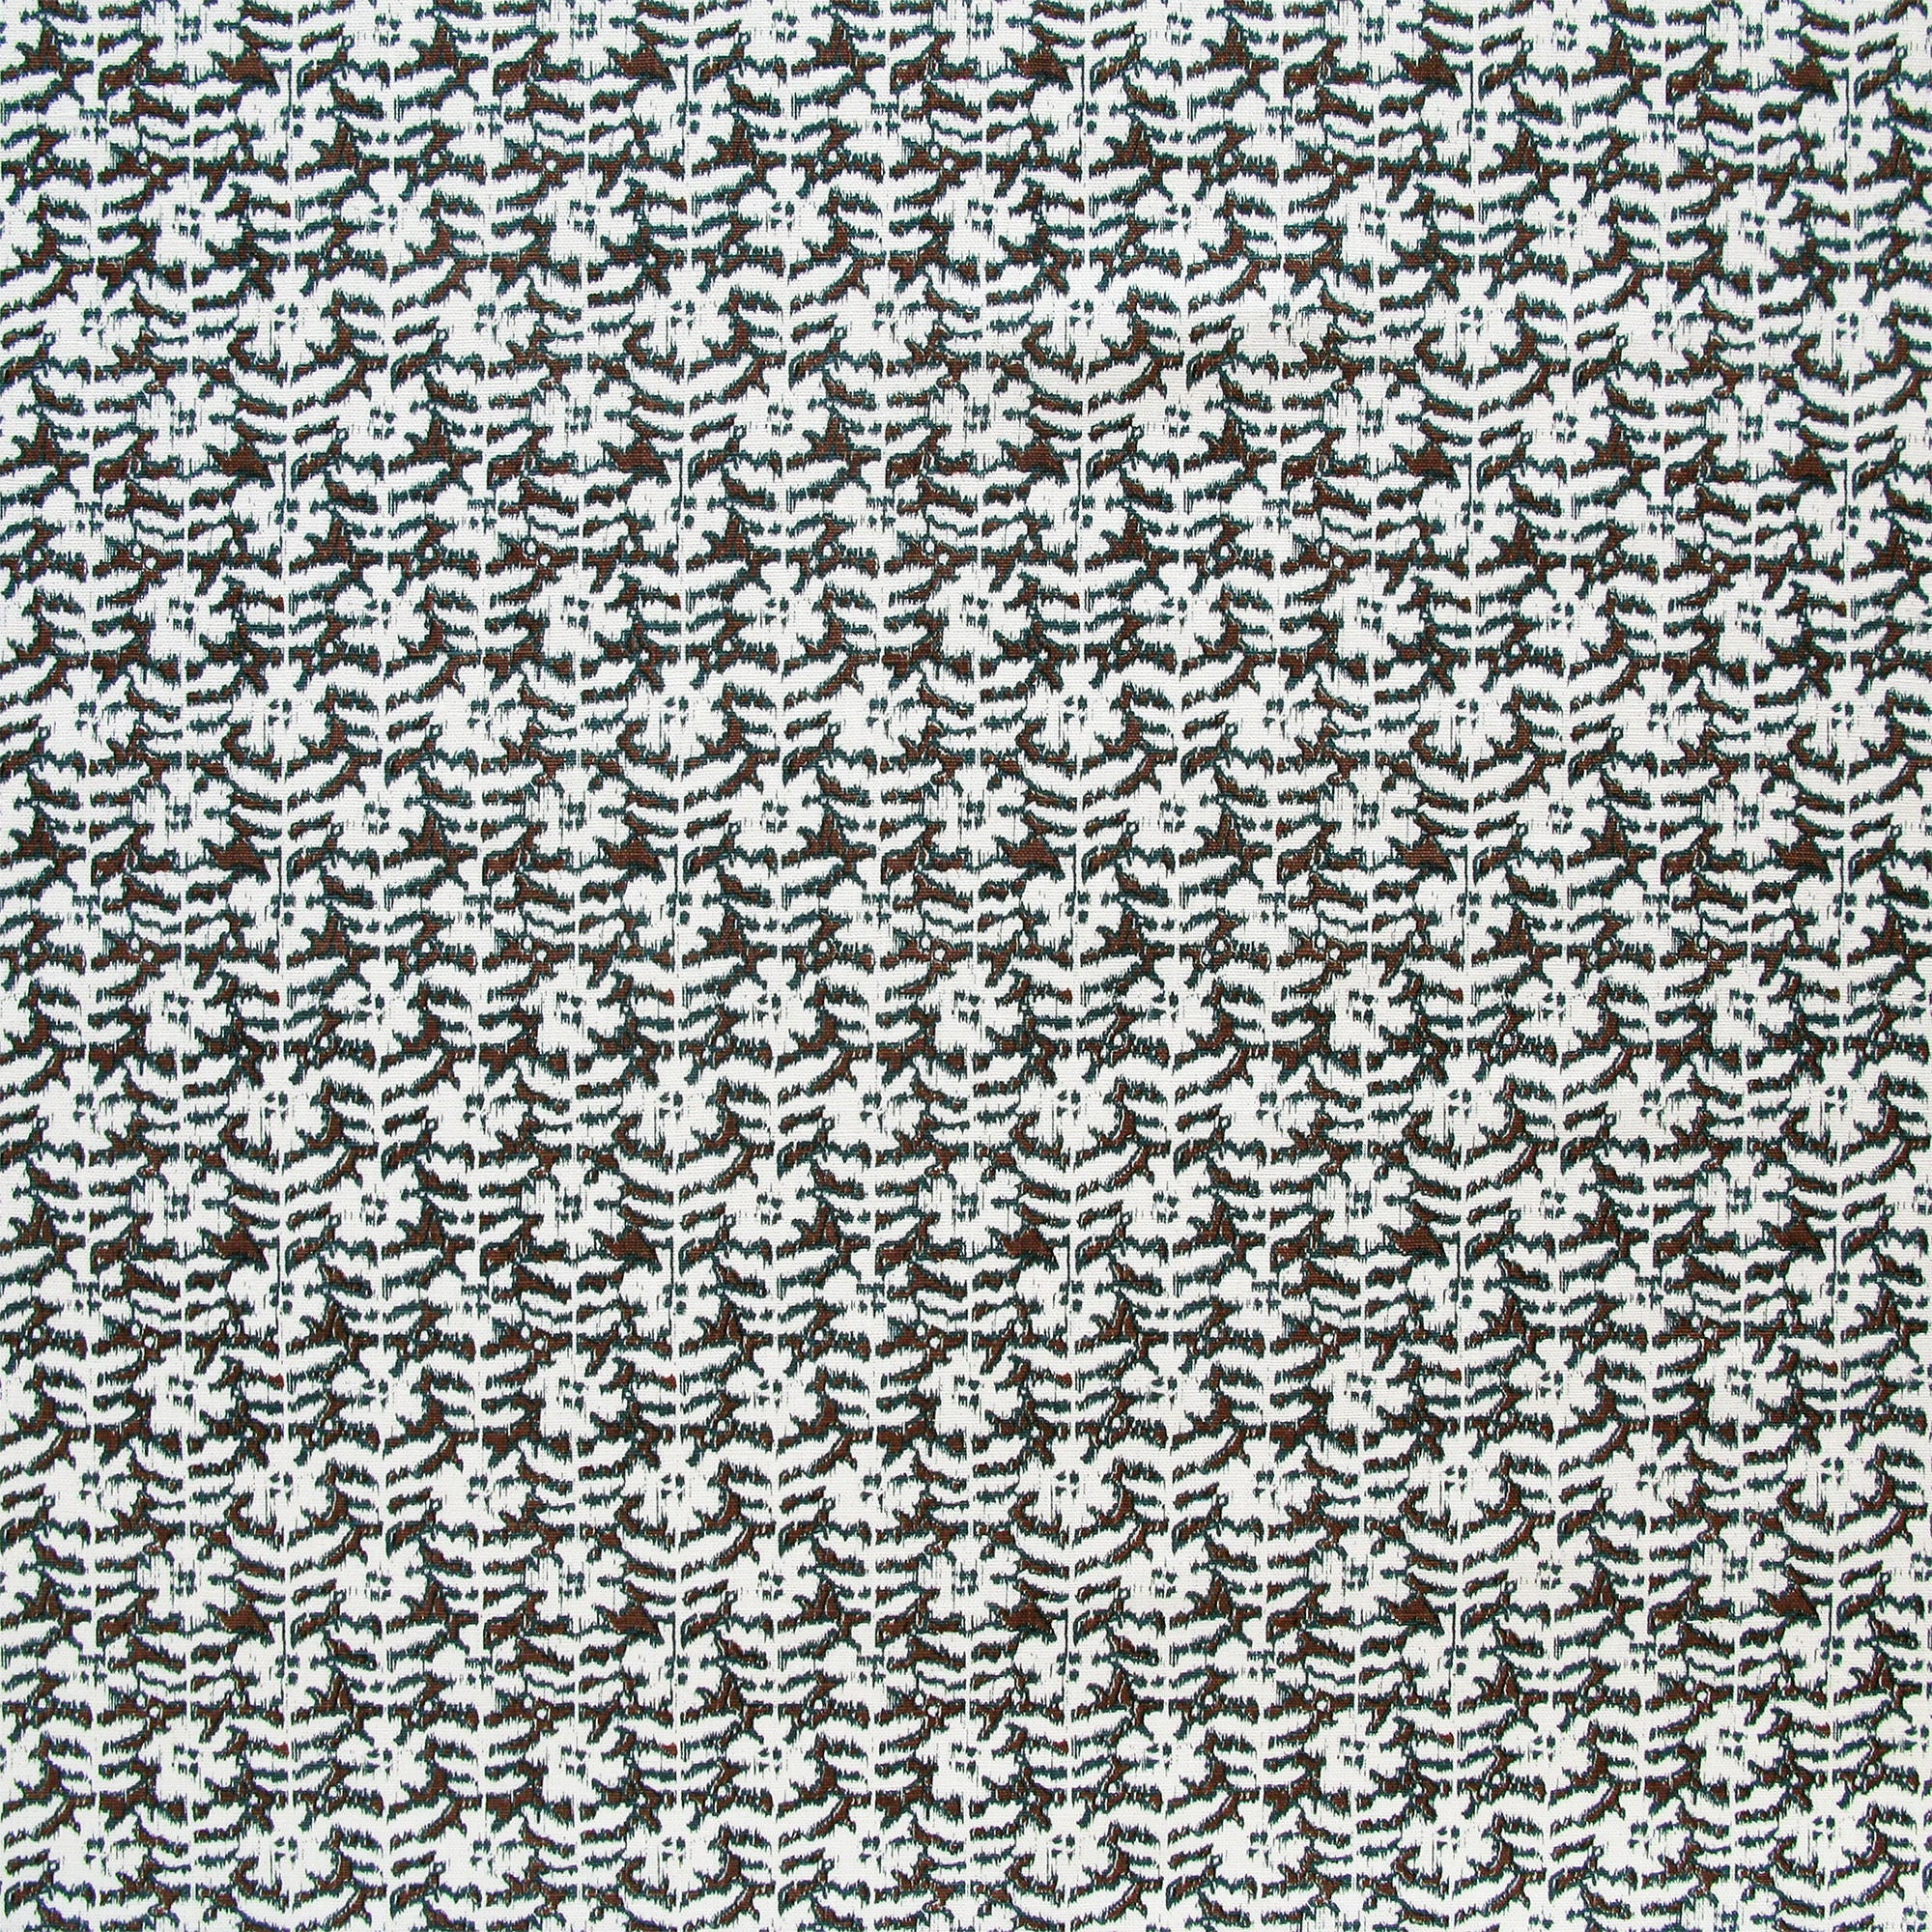 Detail of fabric in a floral grid print in white on a dark brown field.